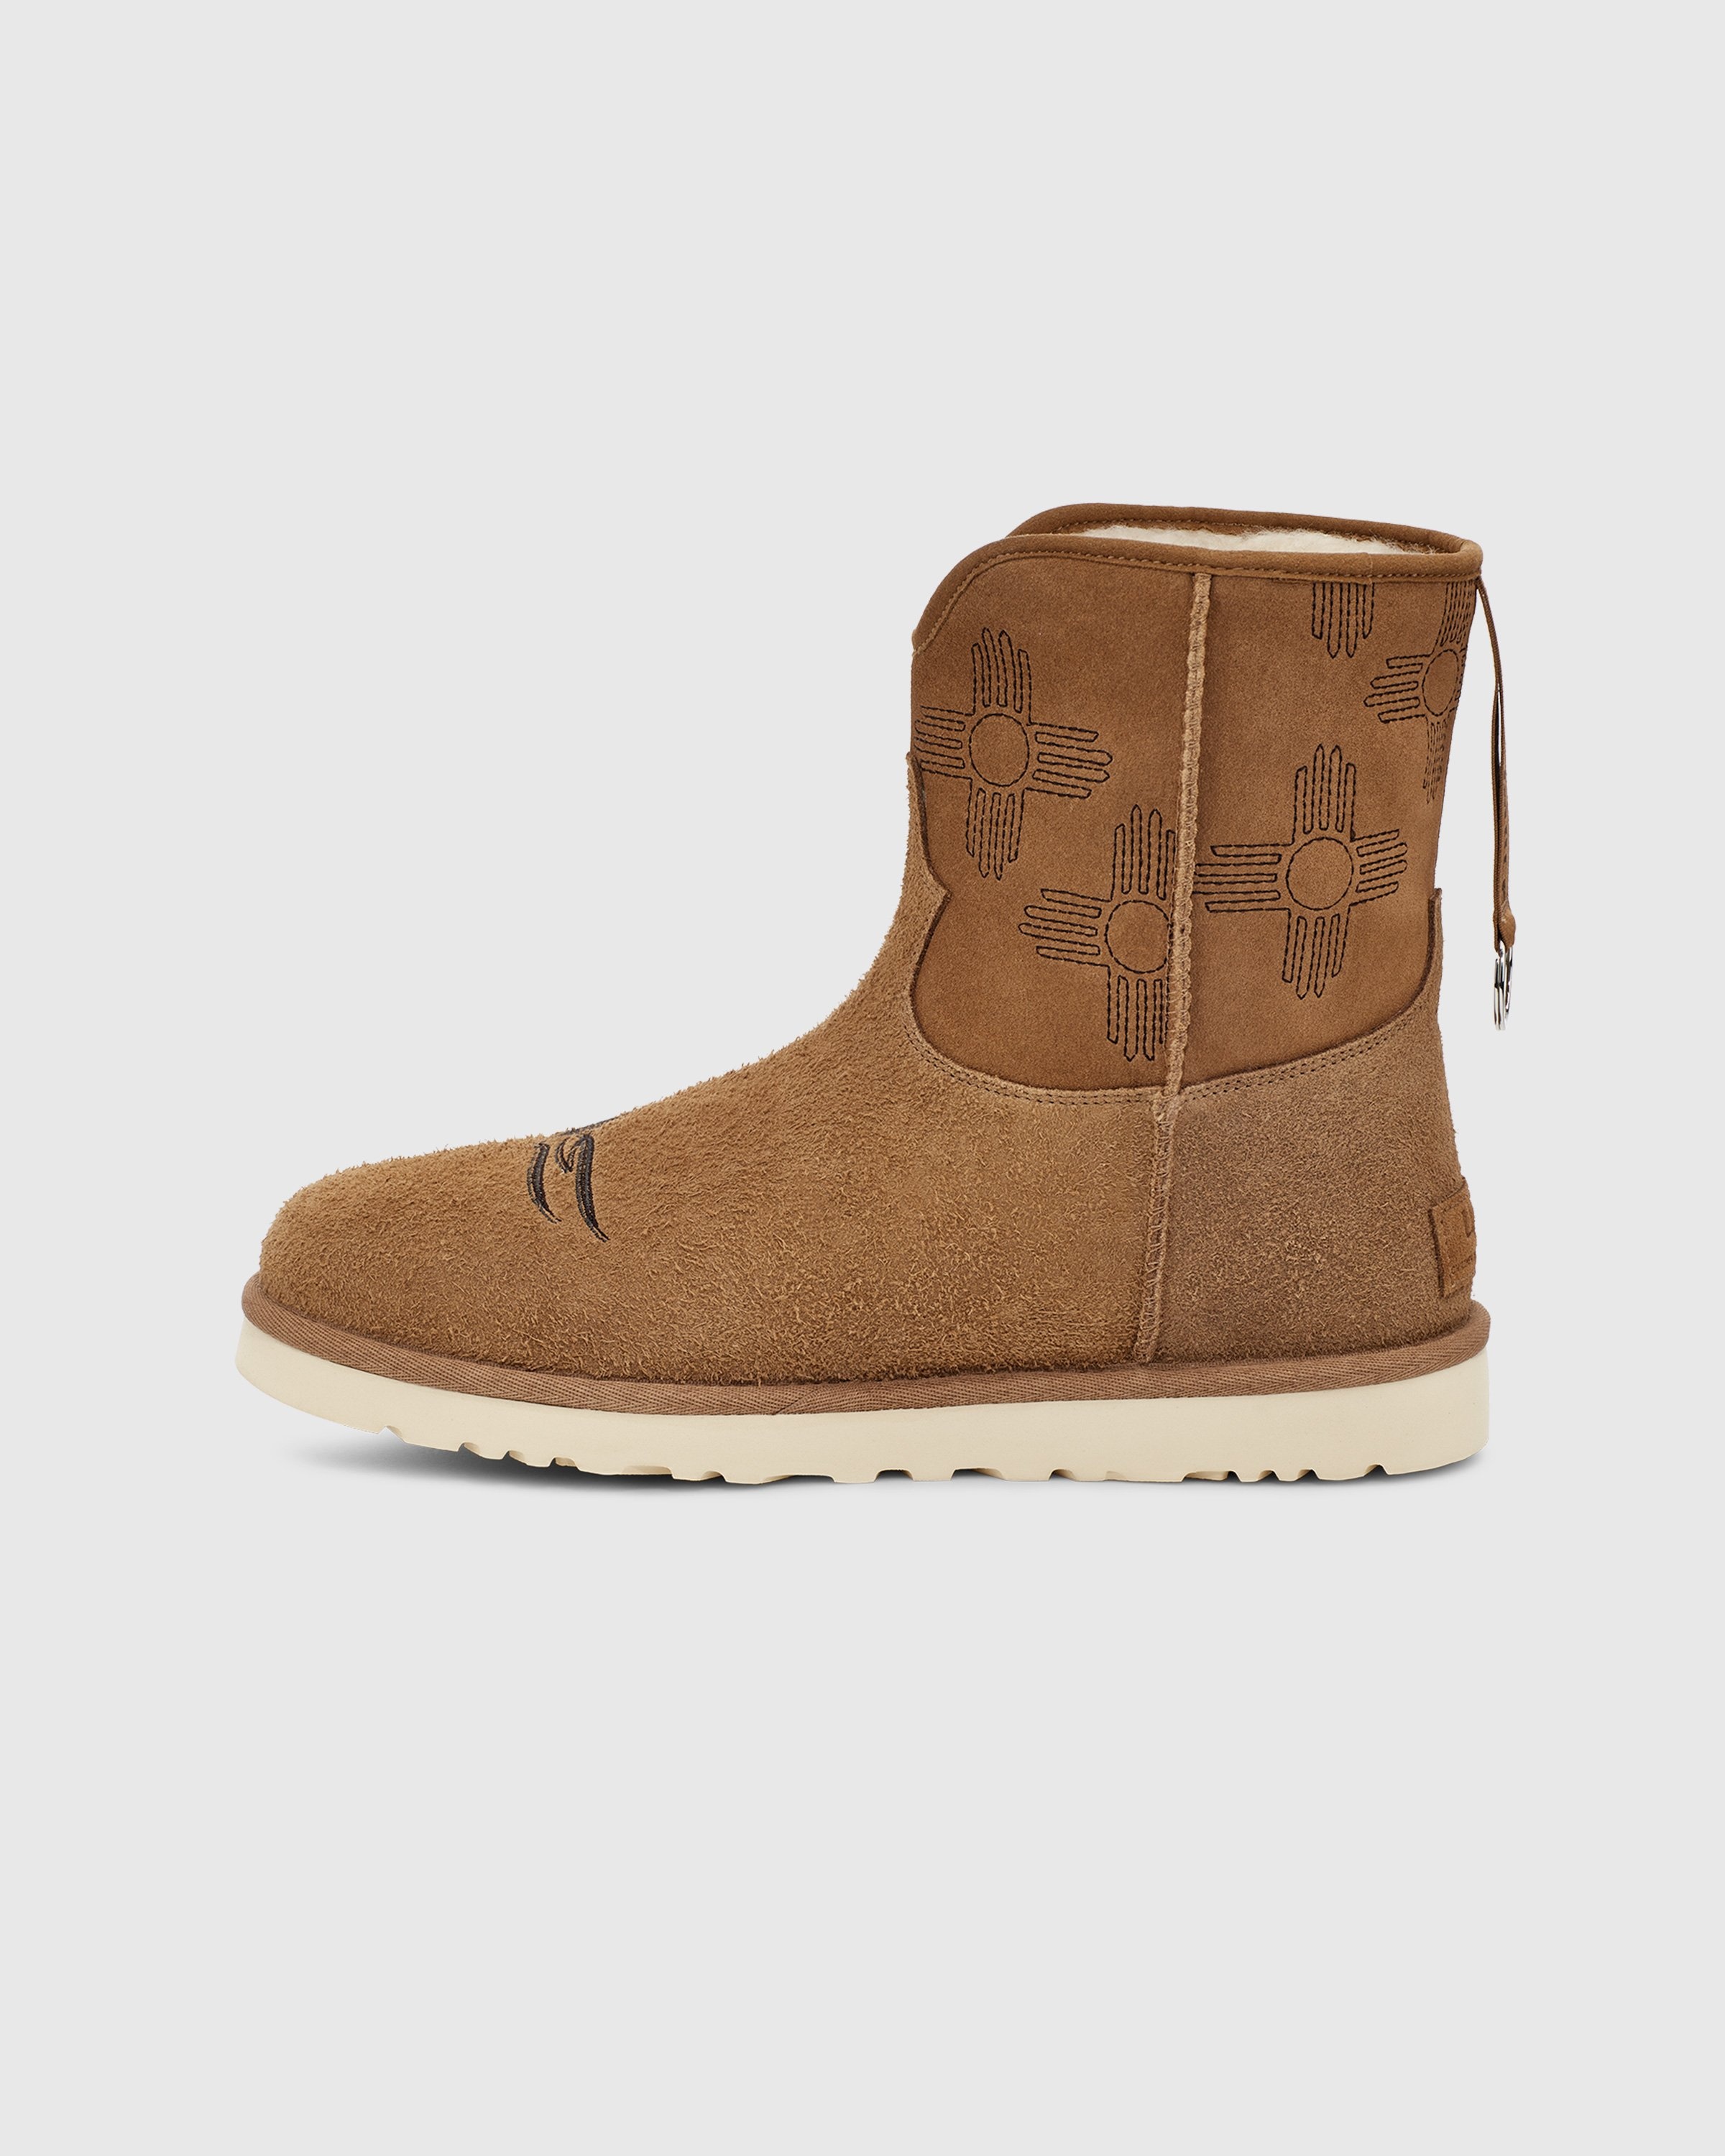 Ugg x Children of the Discordance – Classic Short Boot Brown - Lined Boots - Brown - Image 2